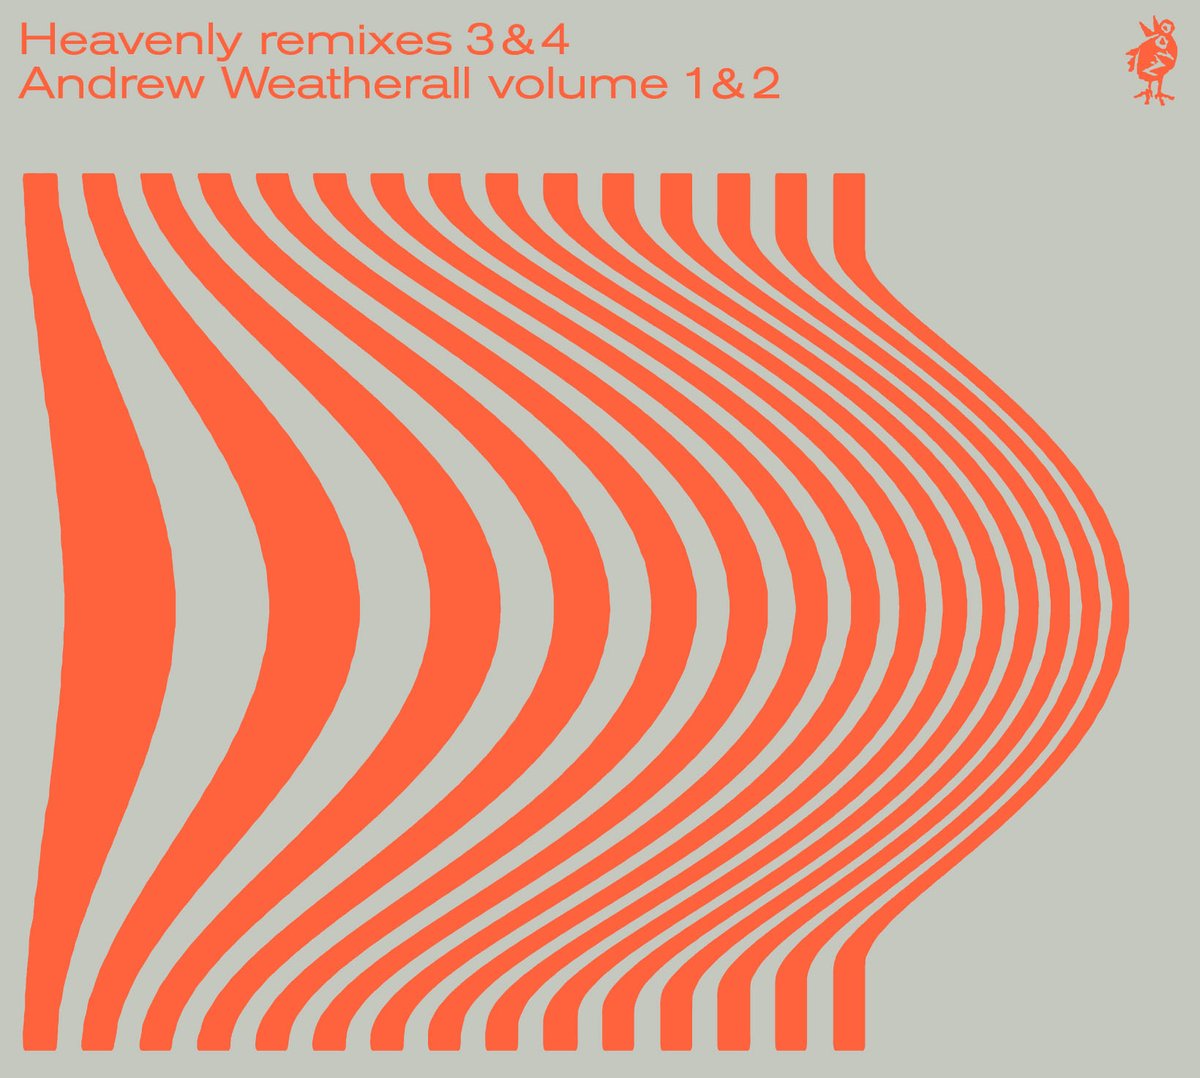 HEAVENLY REMIXES 3 & 4 ANDREW WEATHERALL VOLUMES 1 & 2 Ltd 2LP (Vol 1) / Ltd 2LP (Vol 2) / 2CD Preorder: bit.ly/HeavenlyAndy A selection of Weatherall’s legendary remixing powers, applied to some of Heavenly’s finest moments! @marklanegan